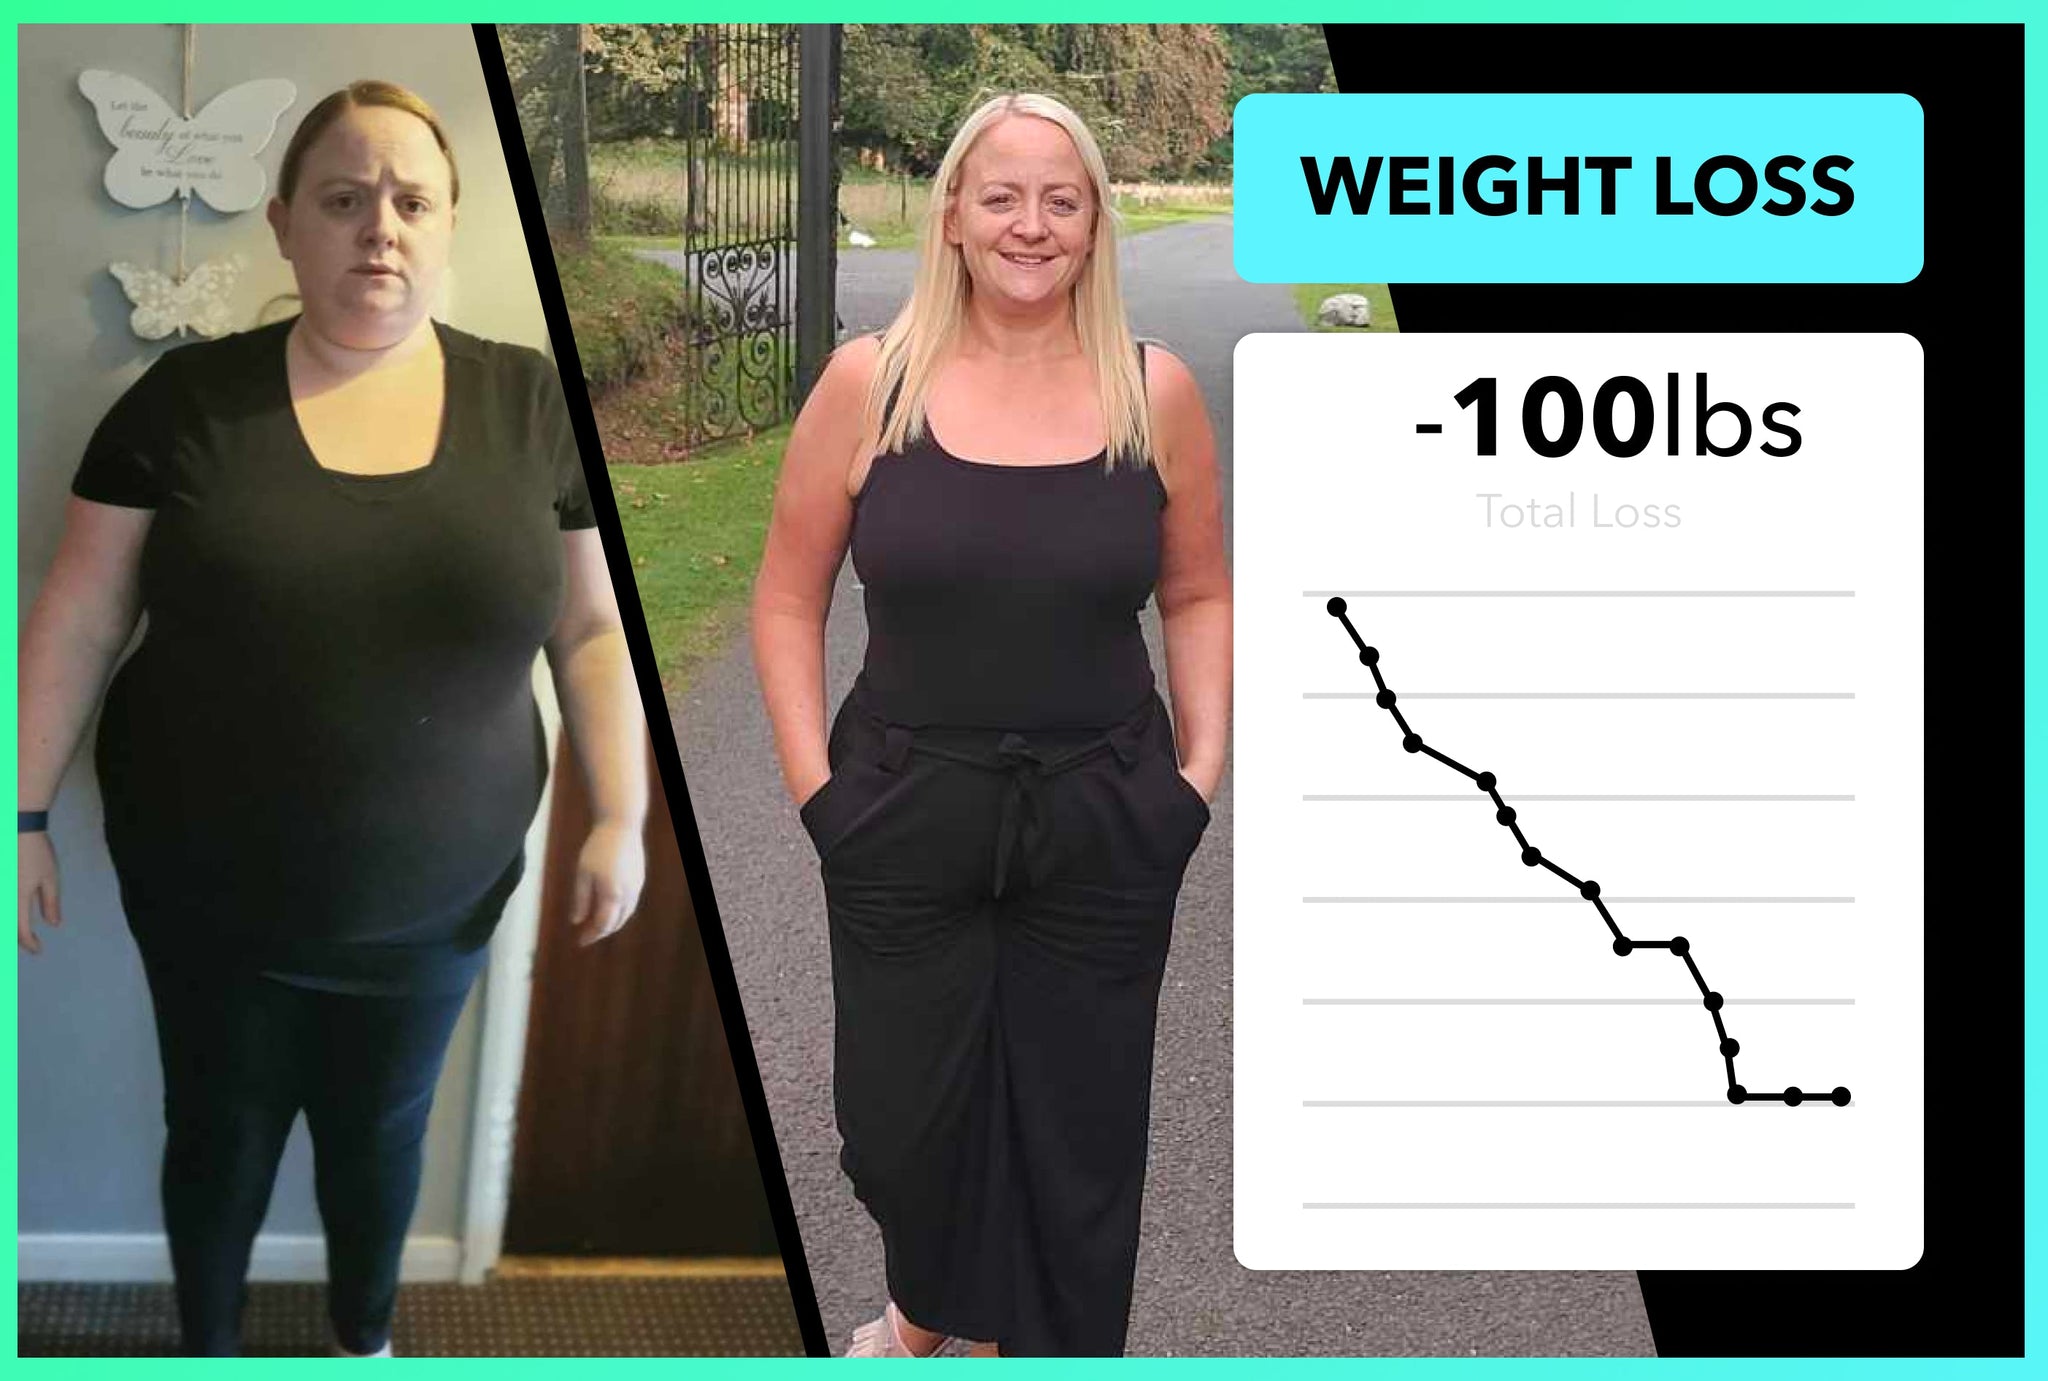 Katrina has lost 100lbs and changed her life!